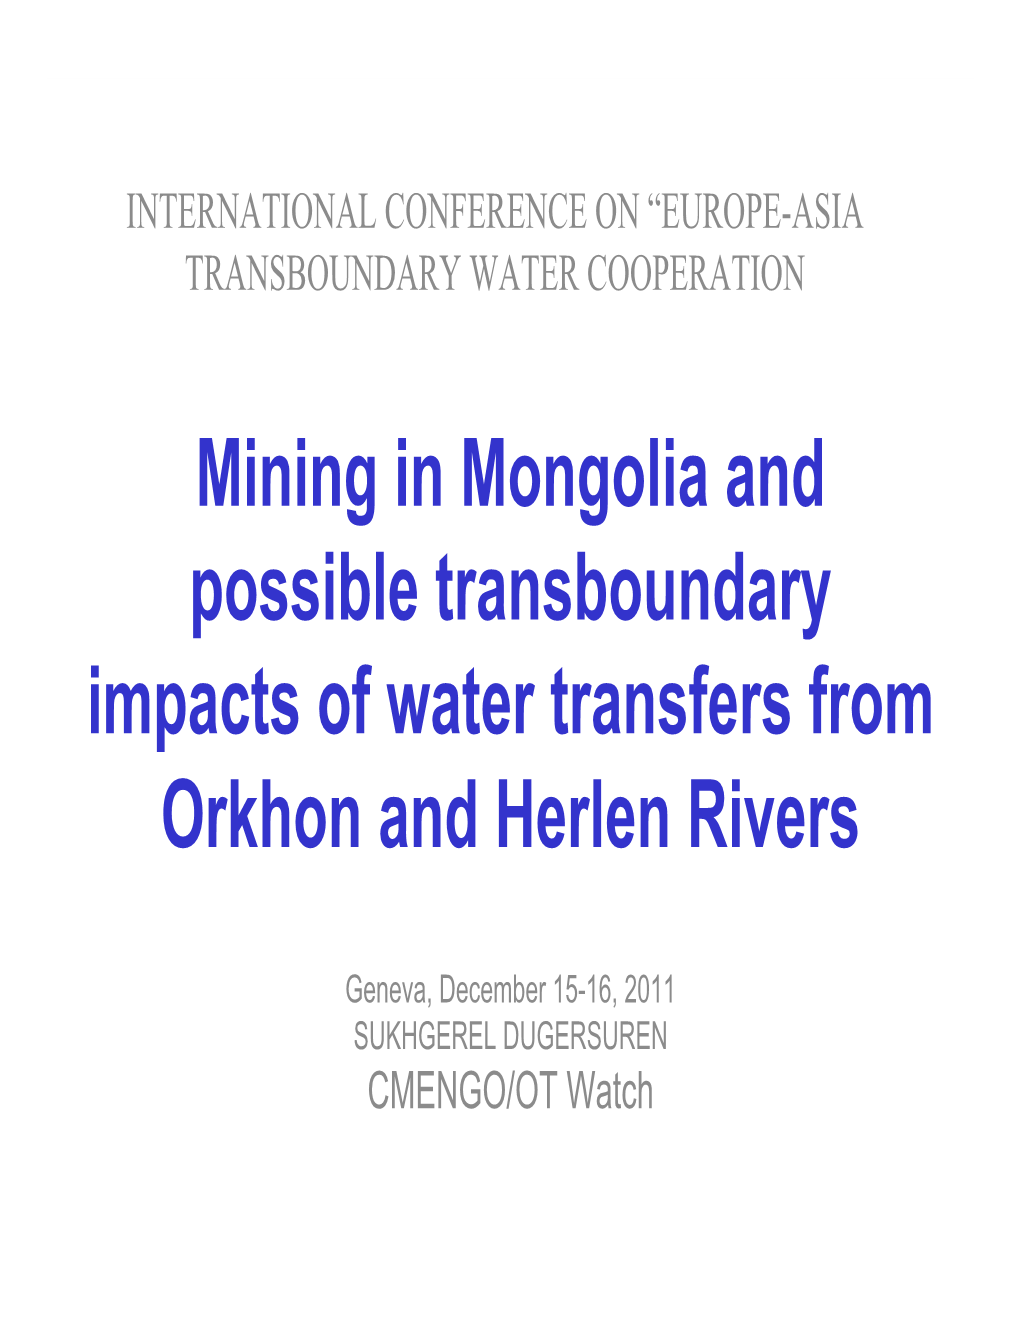 Mining in Mongolia and Possible Transboundary Impacts of Water Transfers from Orkhon and Herlen Rivers